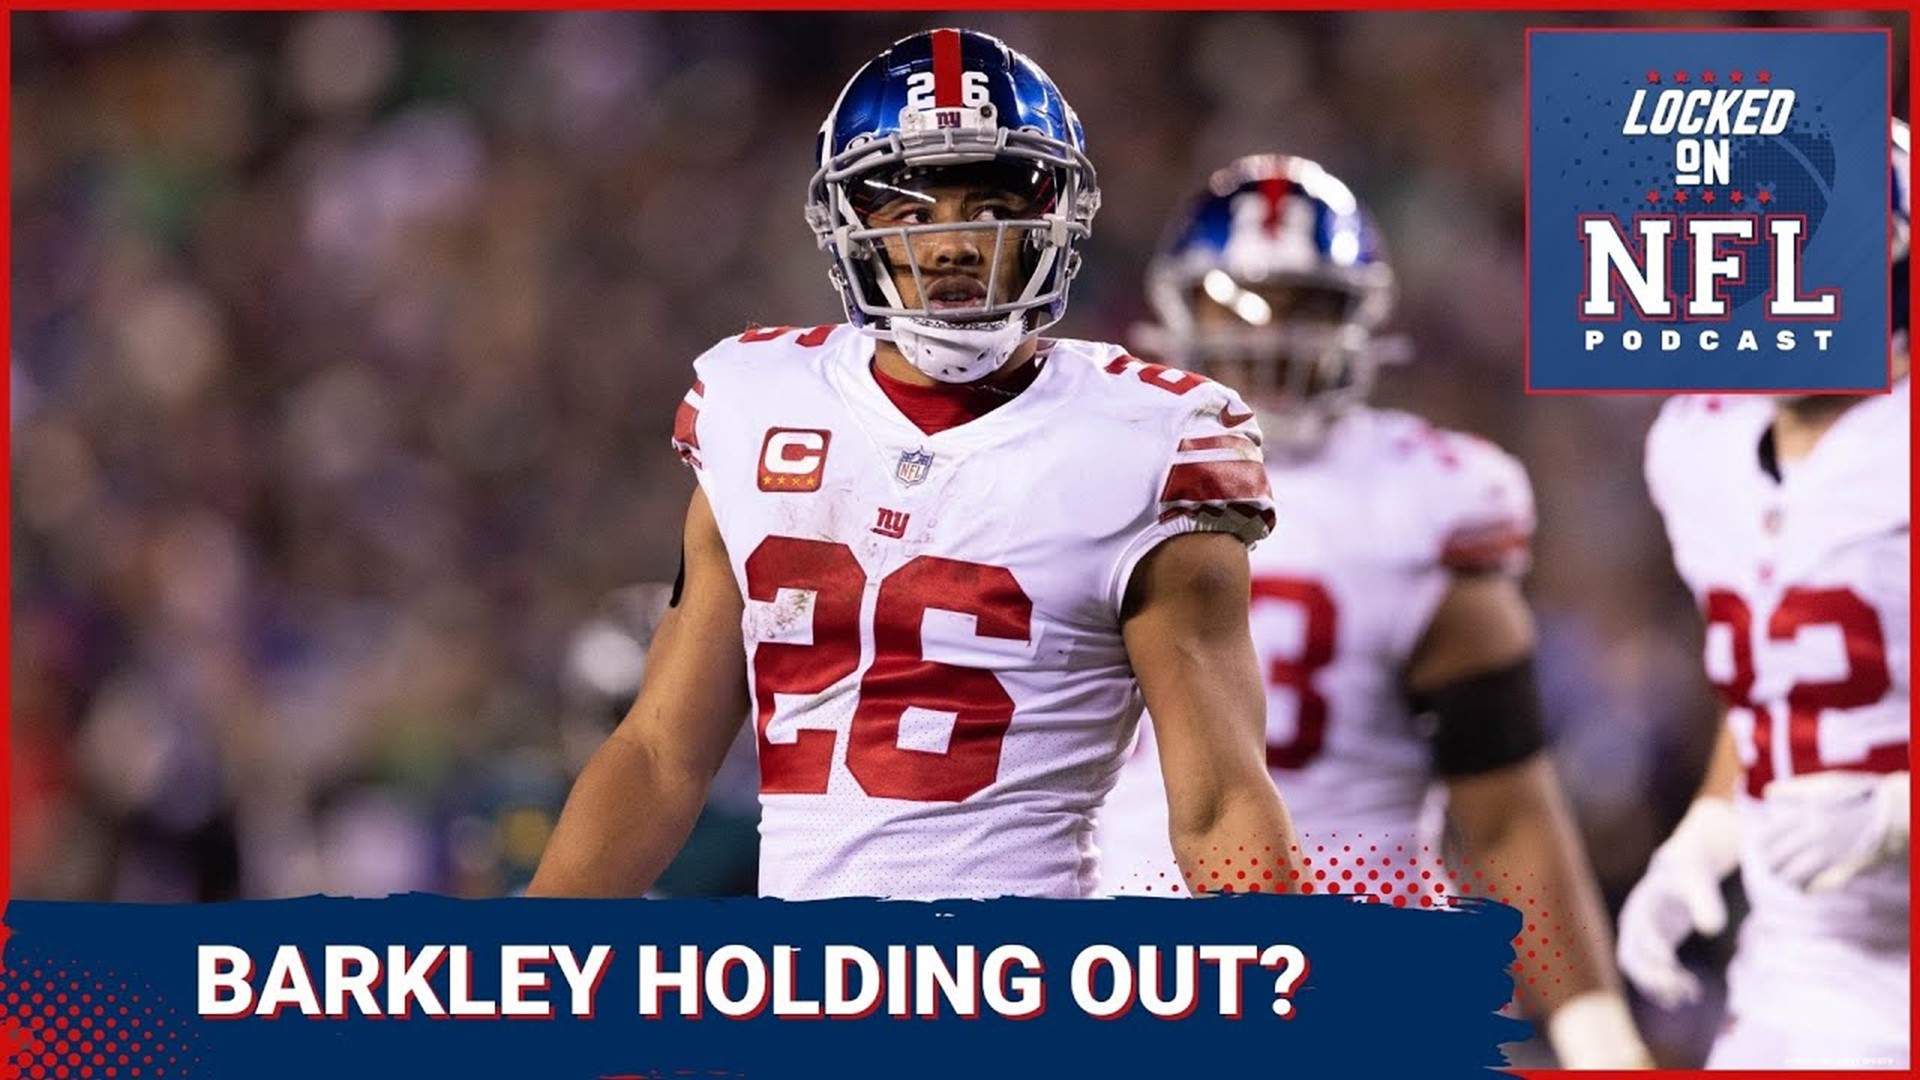 Is Saquon Barkley preparing to hold out from New York Giants' training camp?